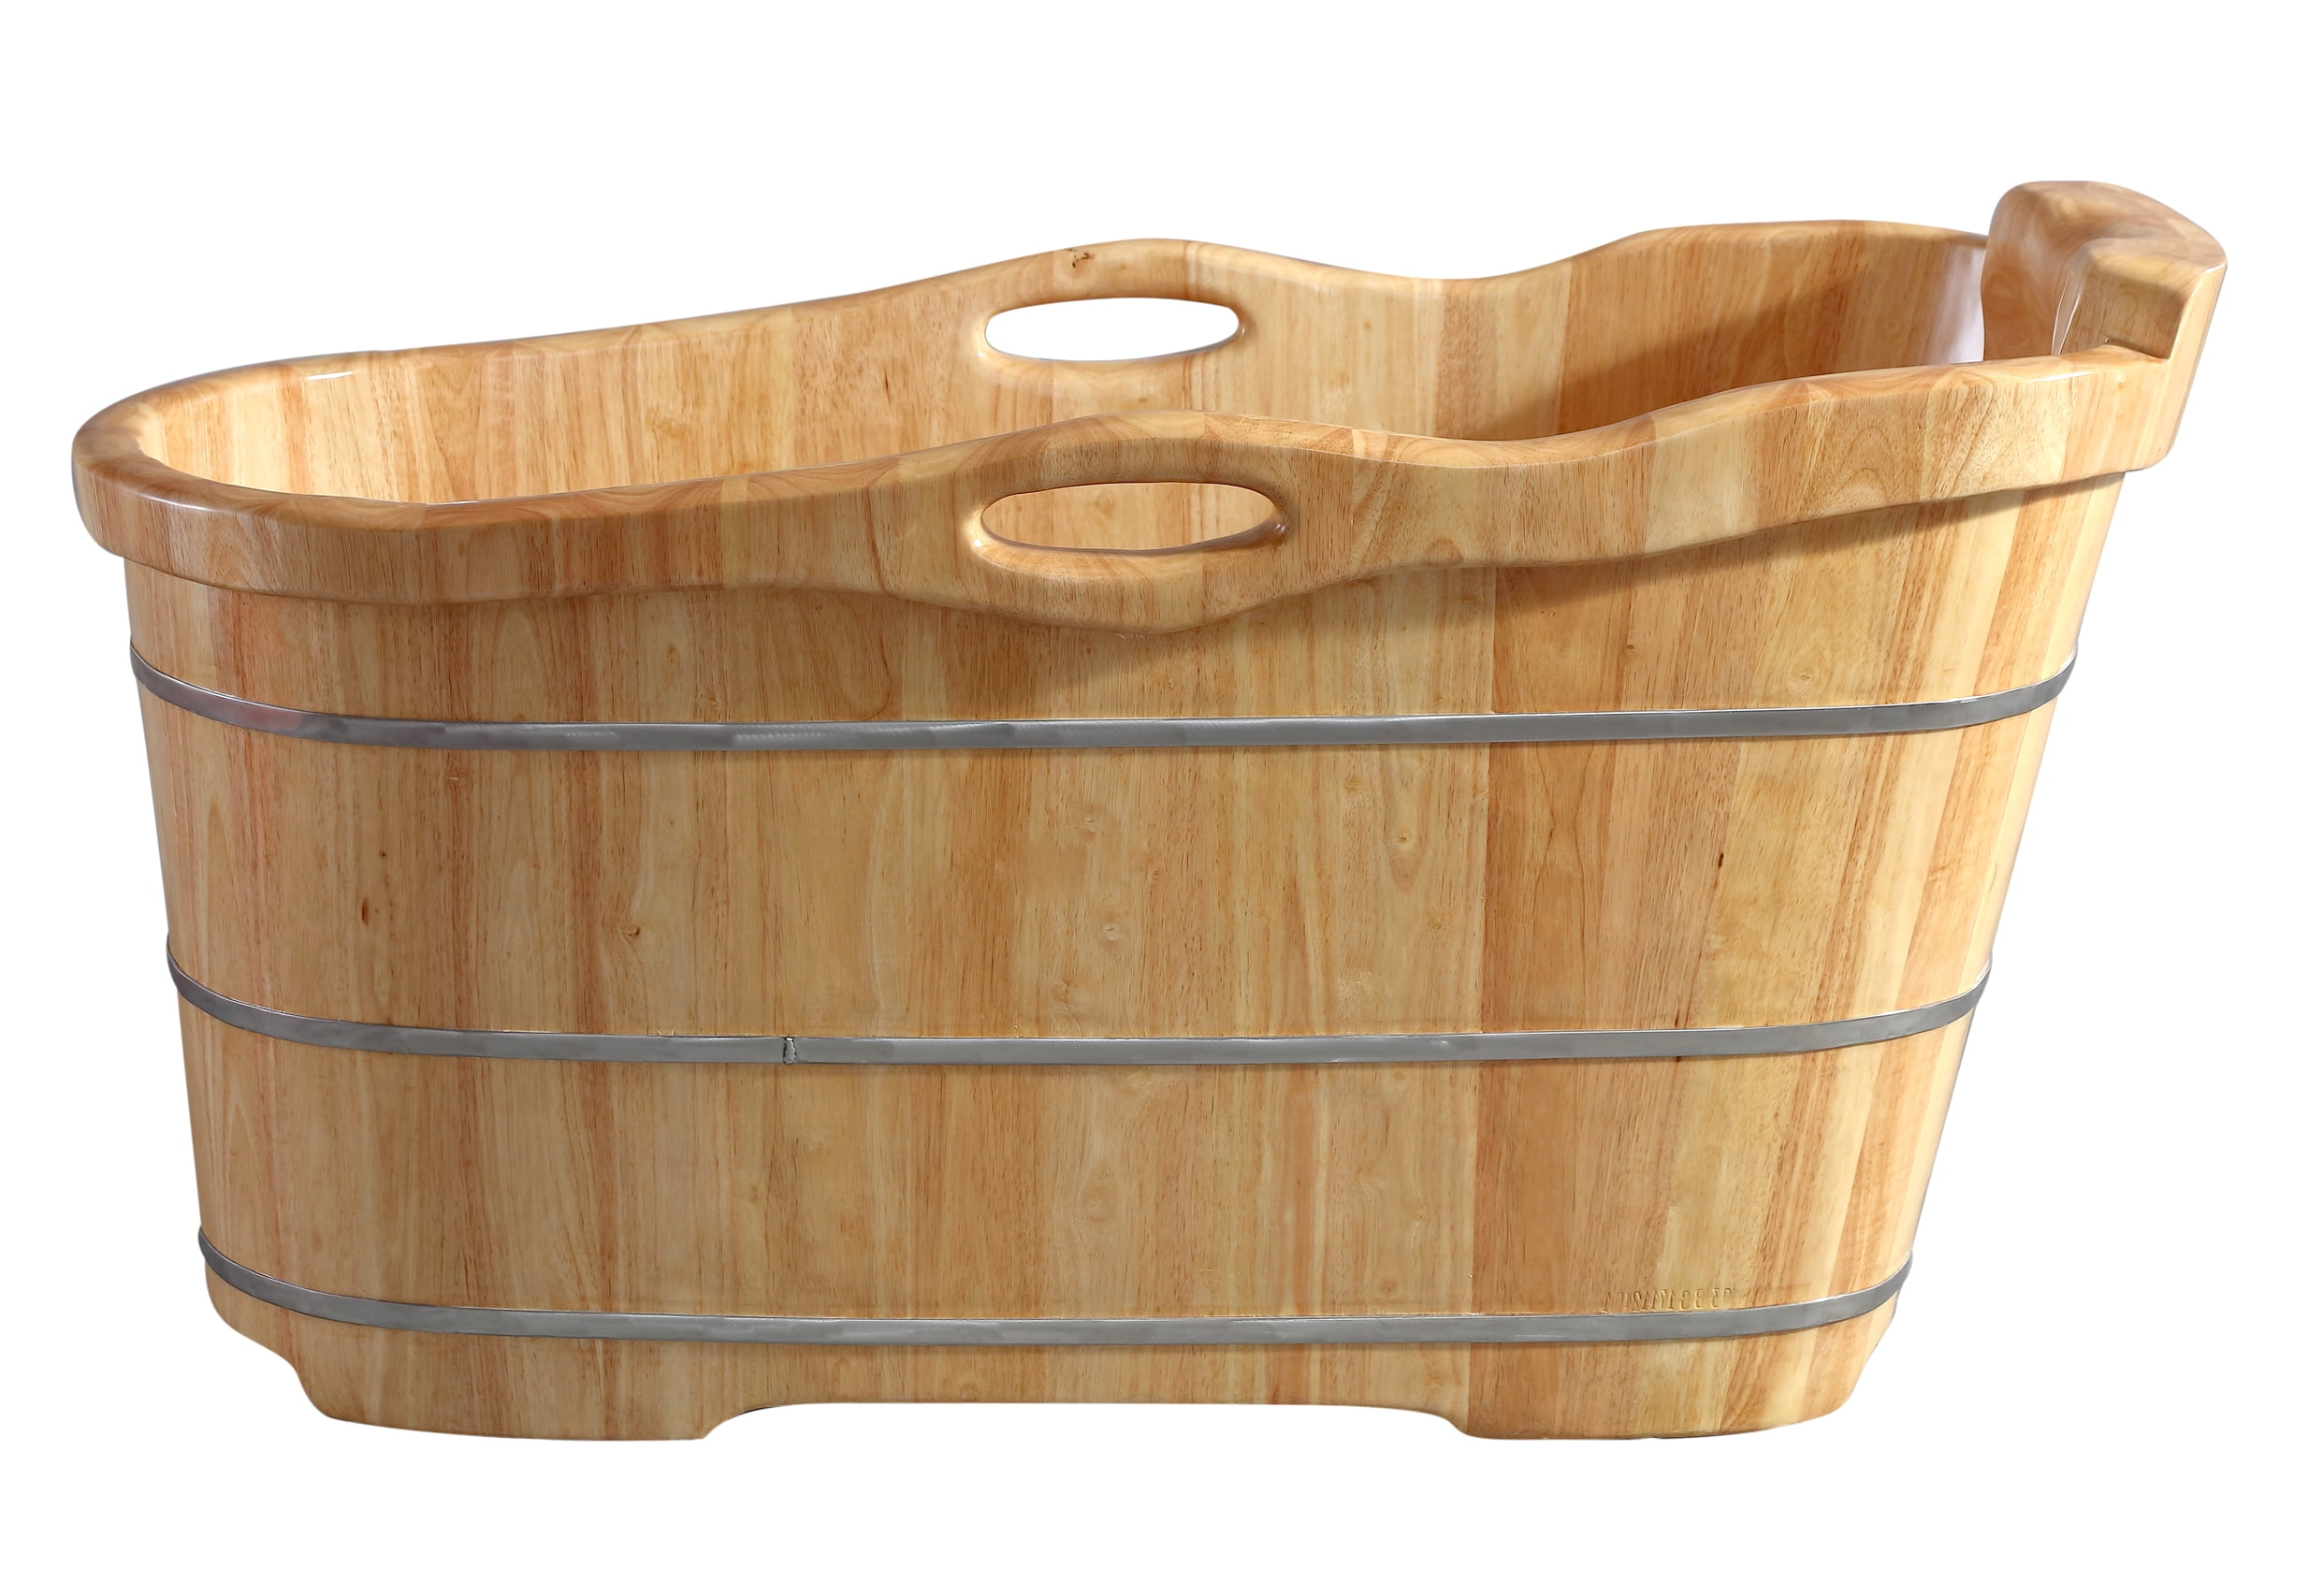 Ab1187 57 In. Free Standing Wooden Soaking Bathtub With Headrest